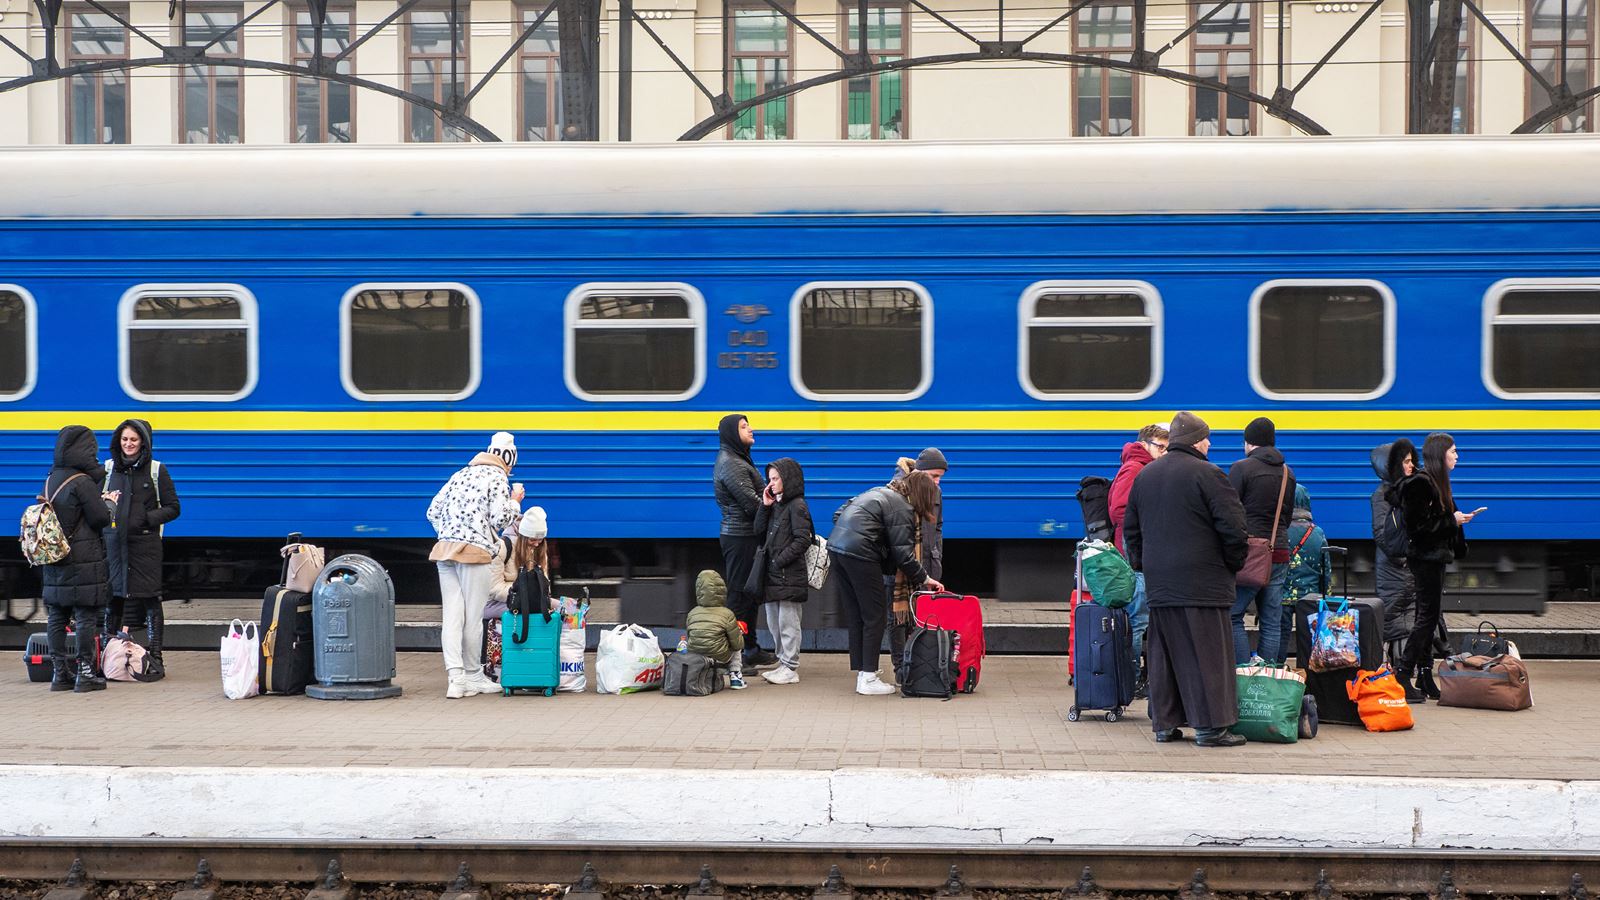 People gather at a train station in Ukraine.